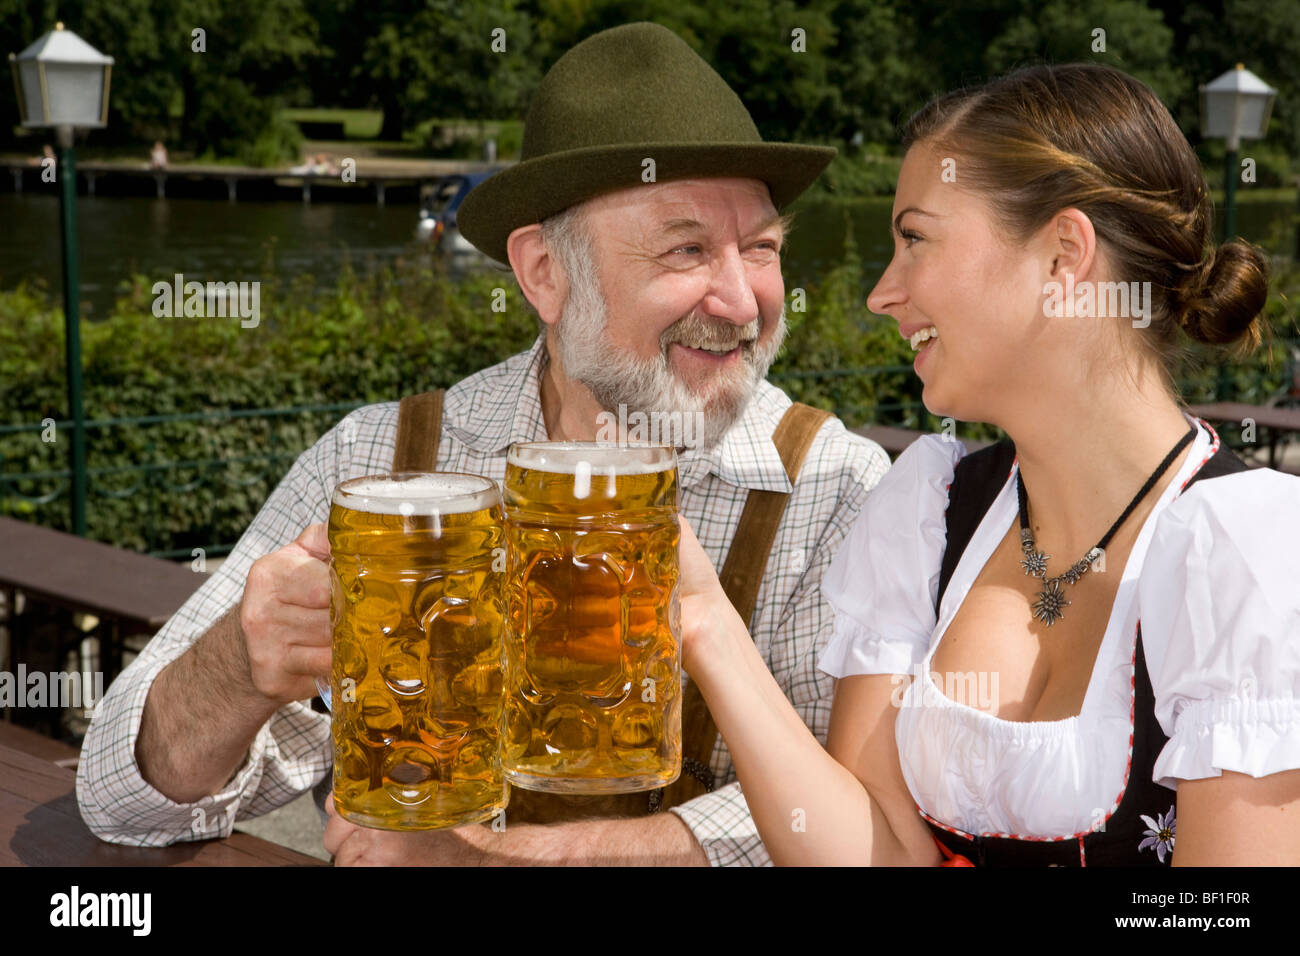 A traditionally clothed German man and woman in a beer garden toasting glasses Stock Photo